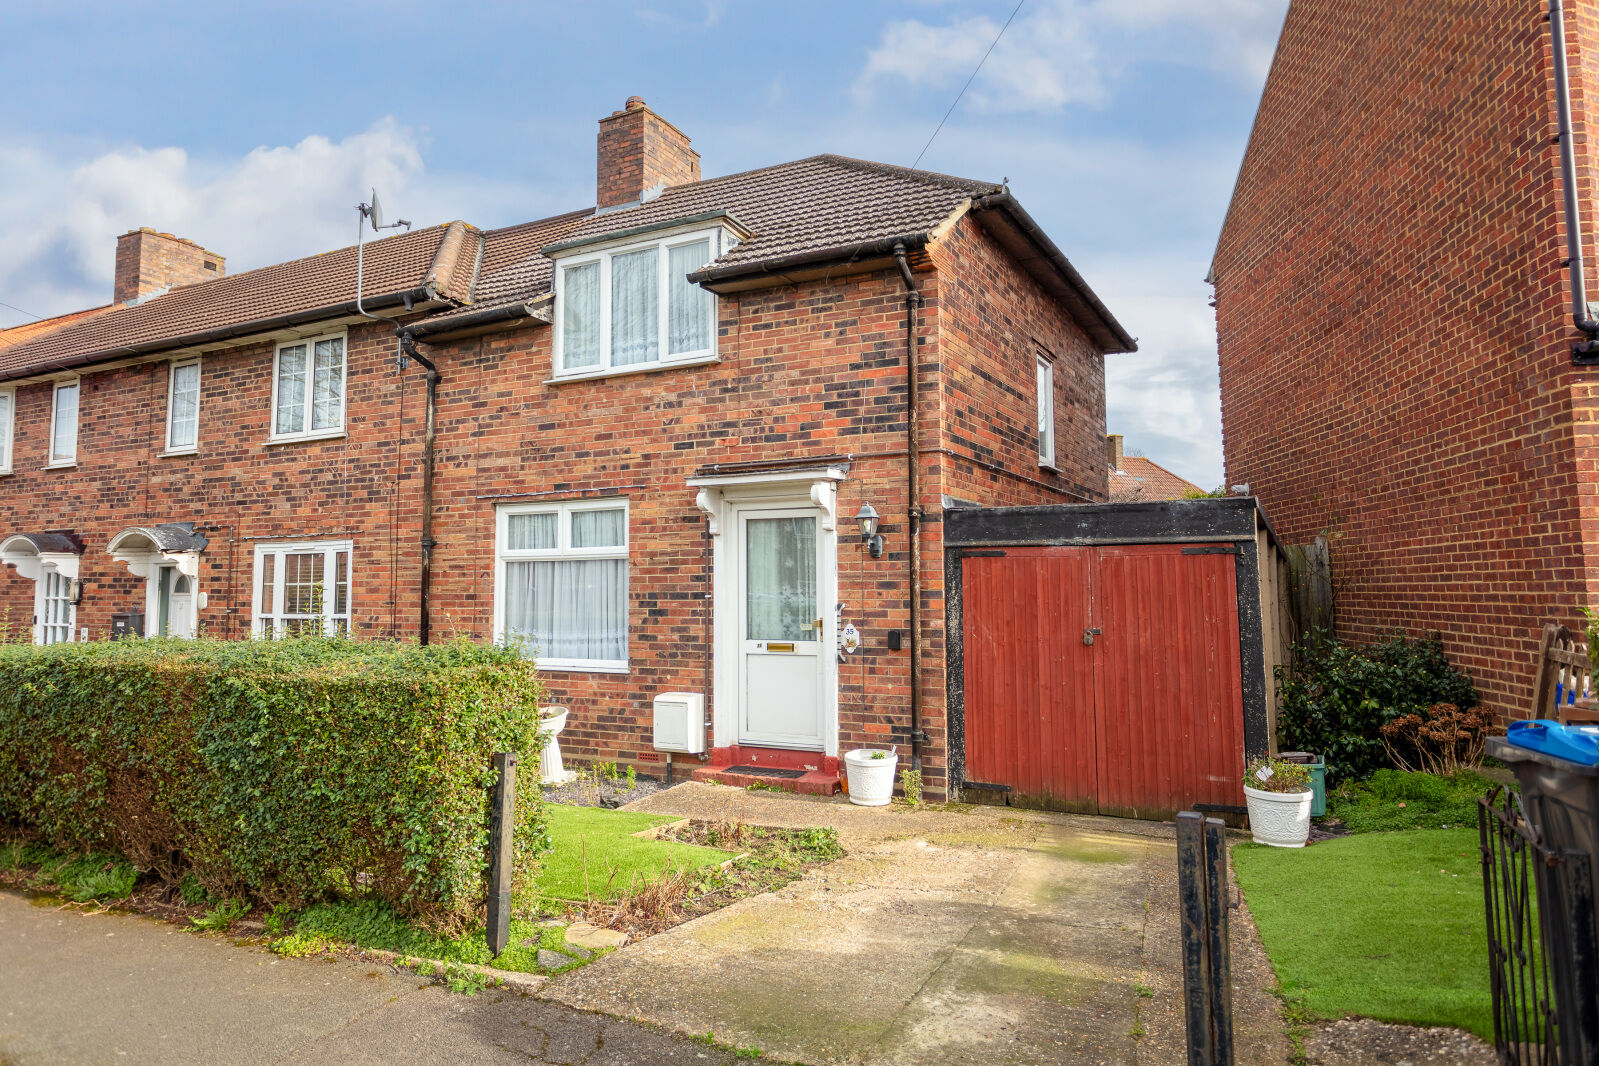 2 bedroom end terraced house for sale Newhouse Walk, Morden, SM4, main image